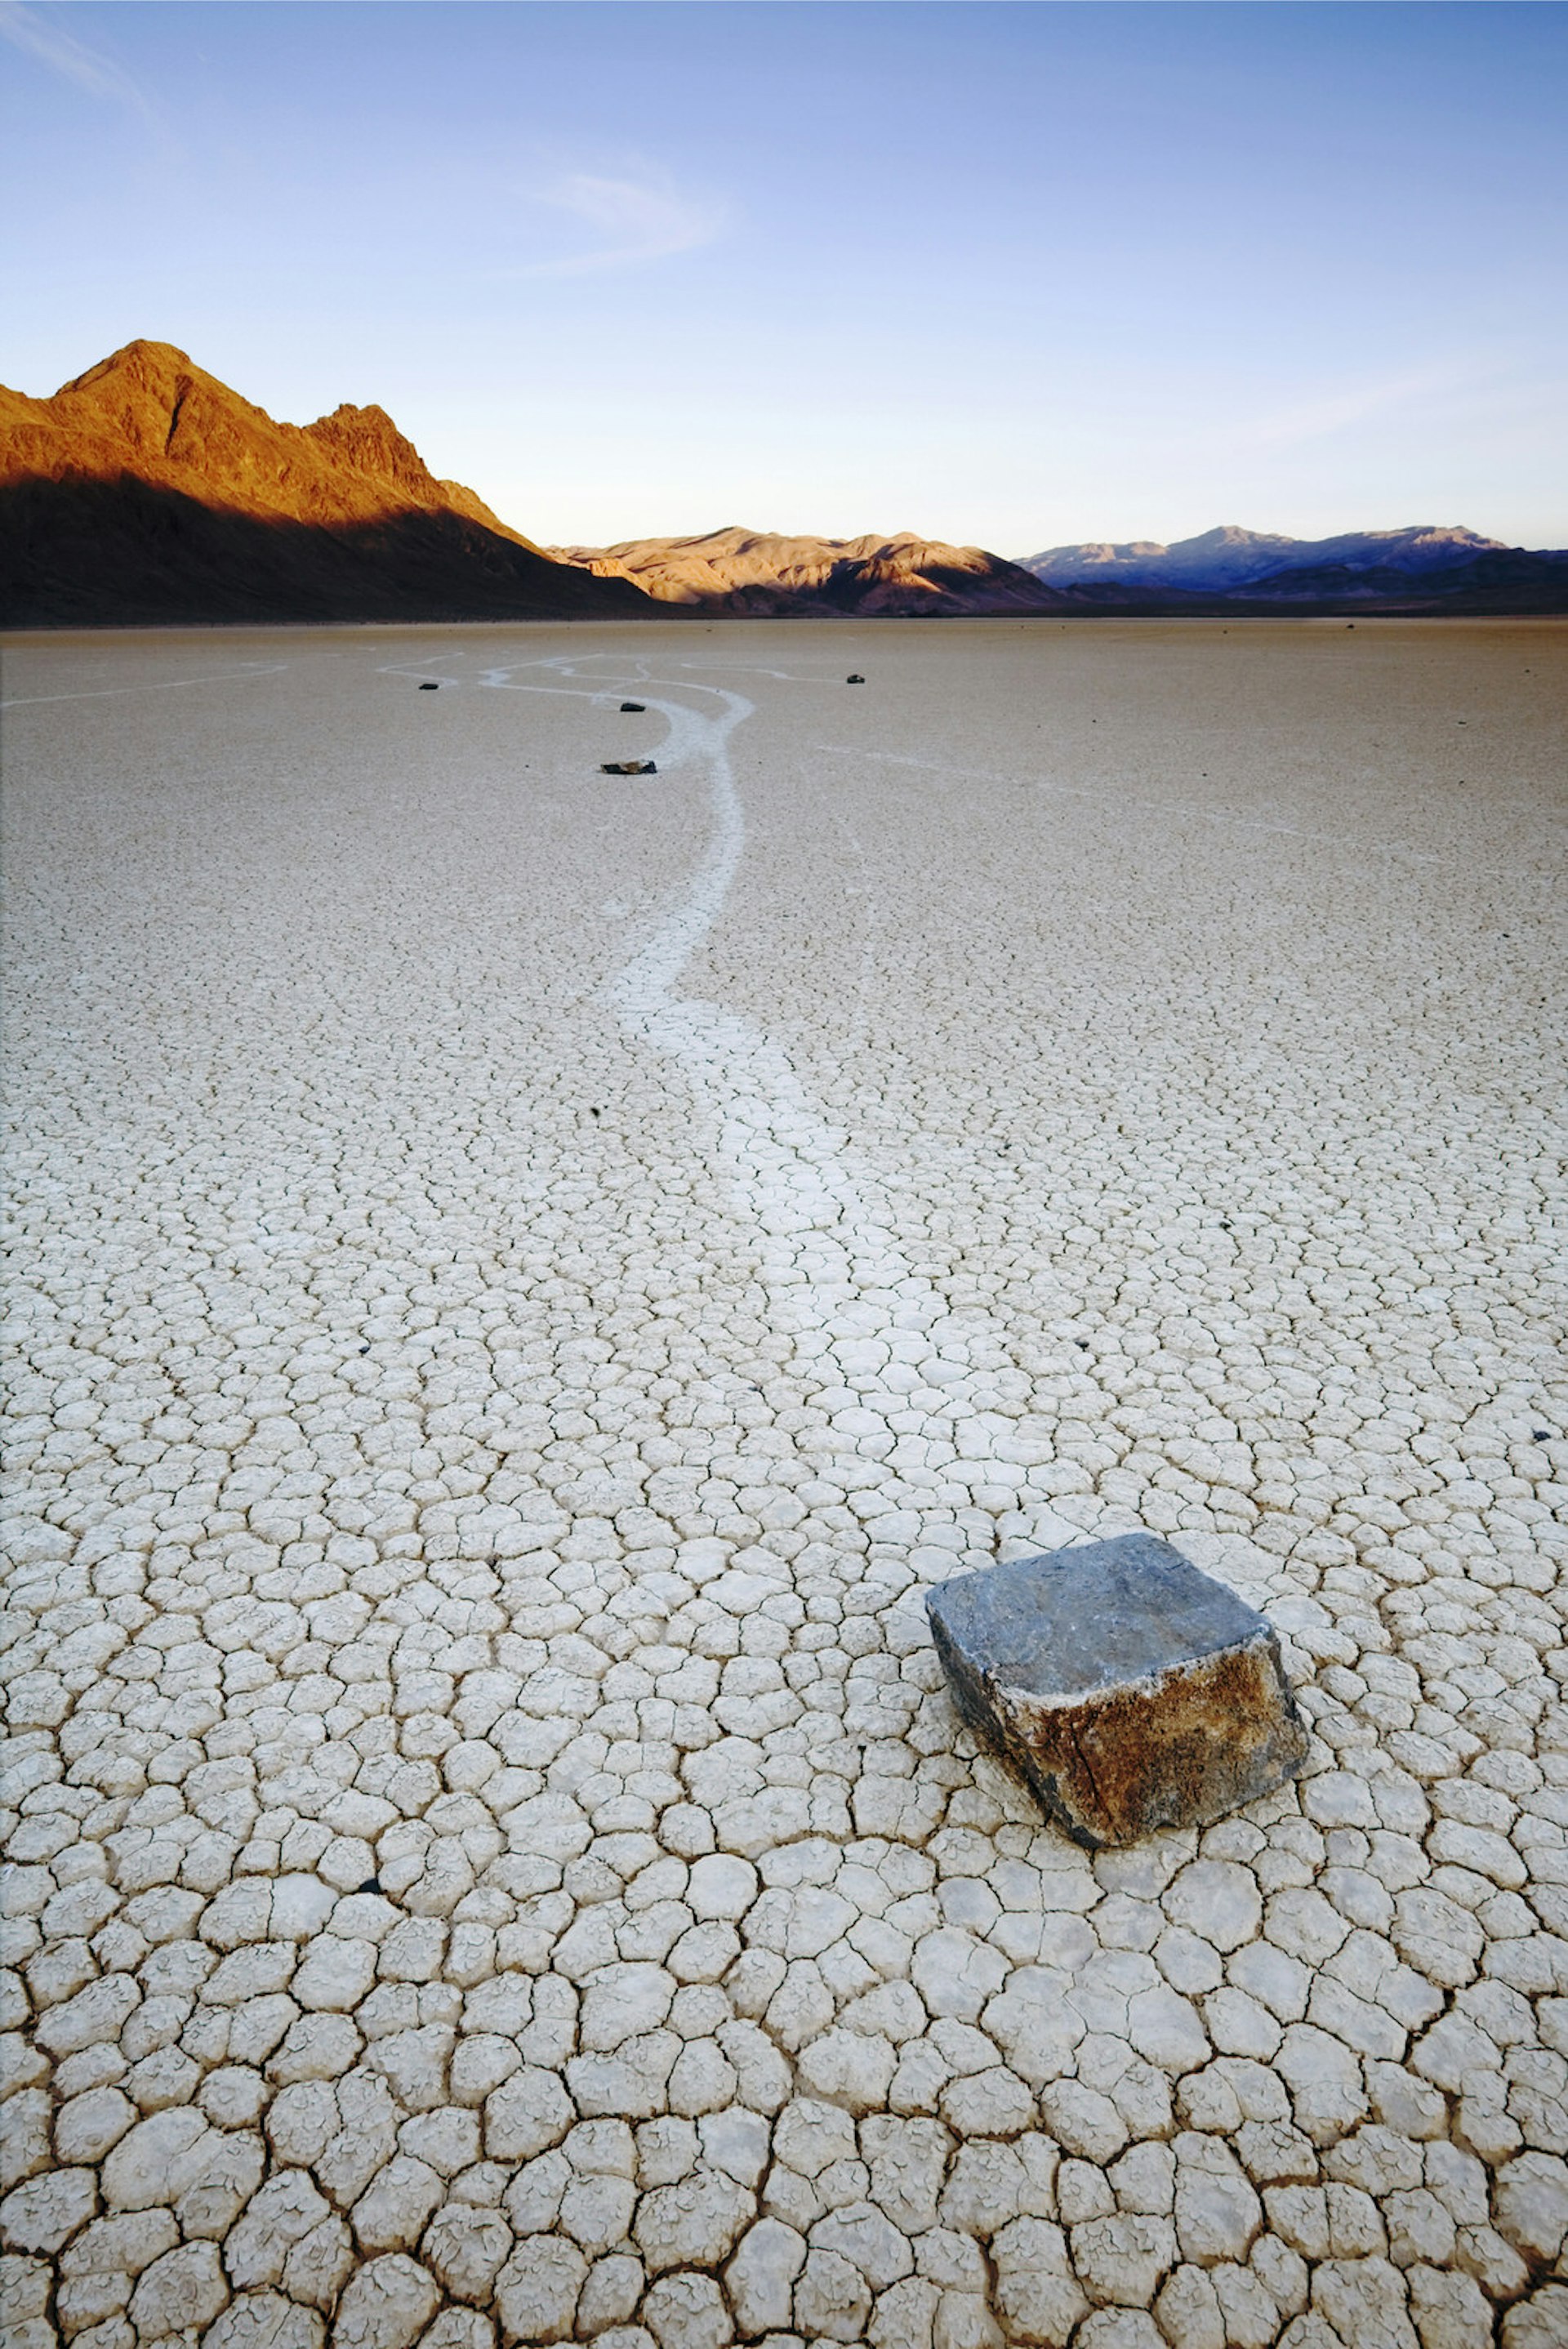 One of the mysterious moving rocks of the Racetrack Playa in Death Valley National Park, California © John Delapp / Getty Images